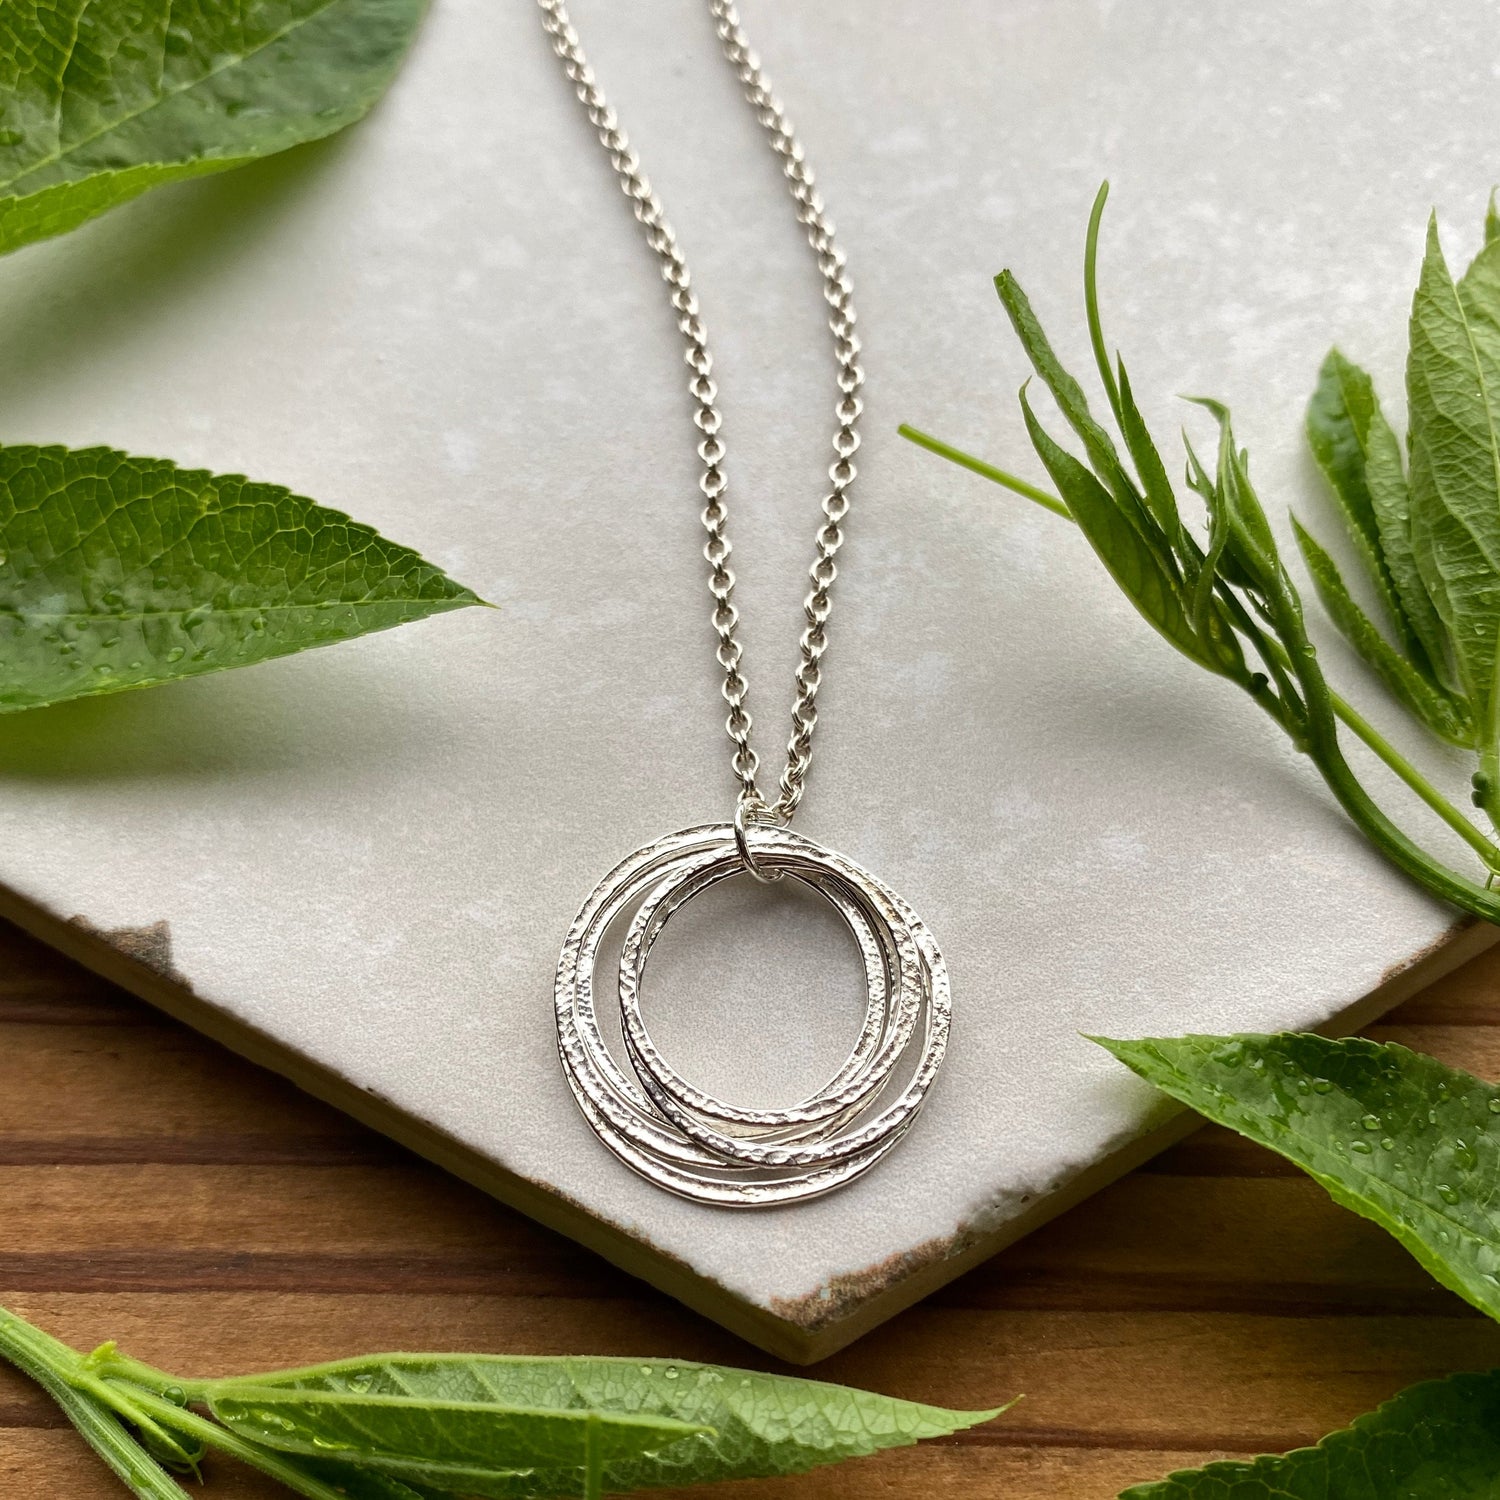 50th Milestone Birthday Necklace, Mid Size Sterling Silver 5 Rings for 5 Decades, Perfectly Imperfect Sparkly Five Circles Pendant